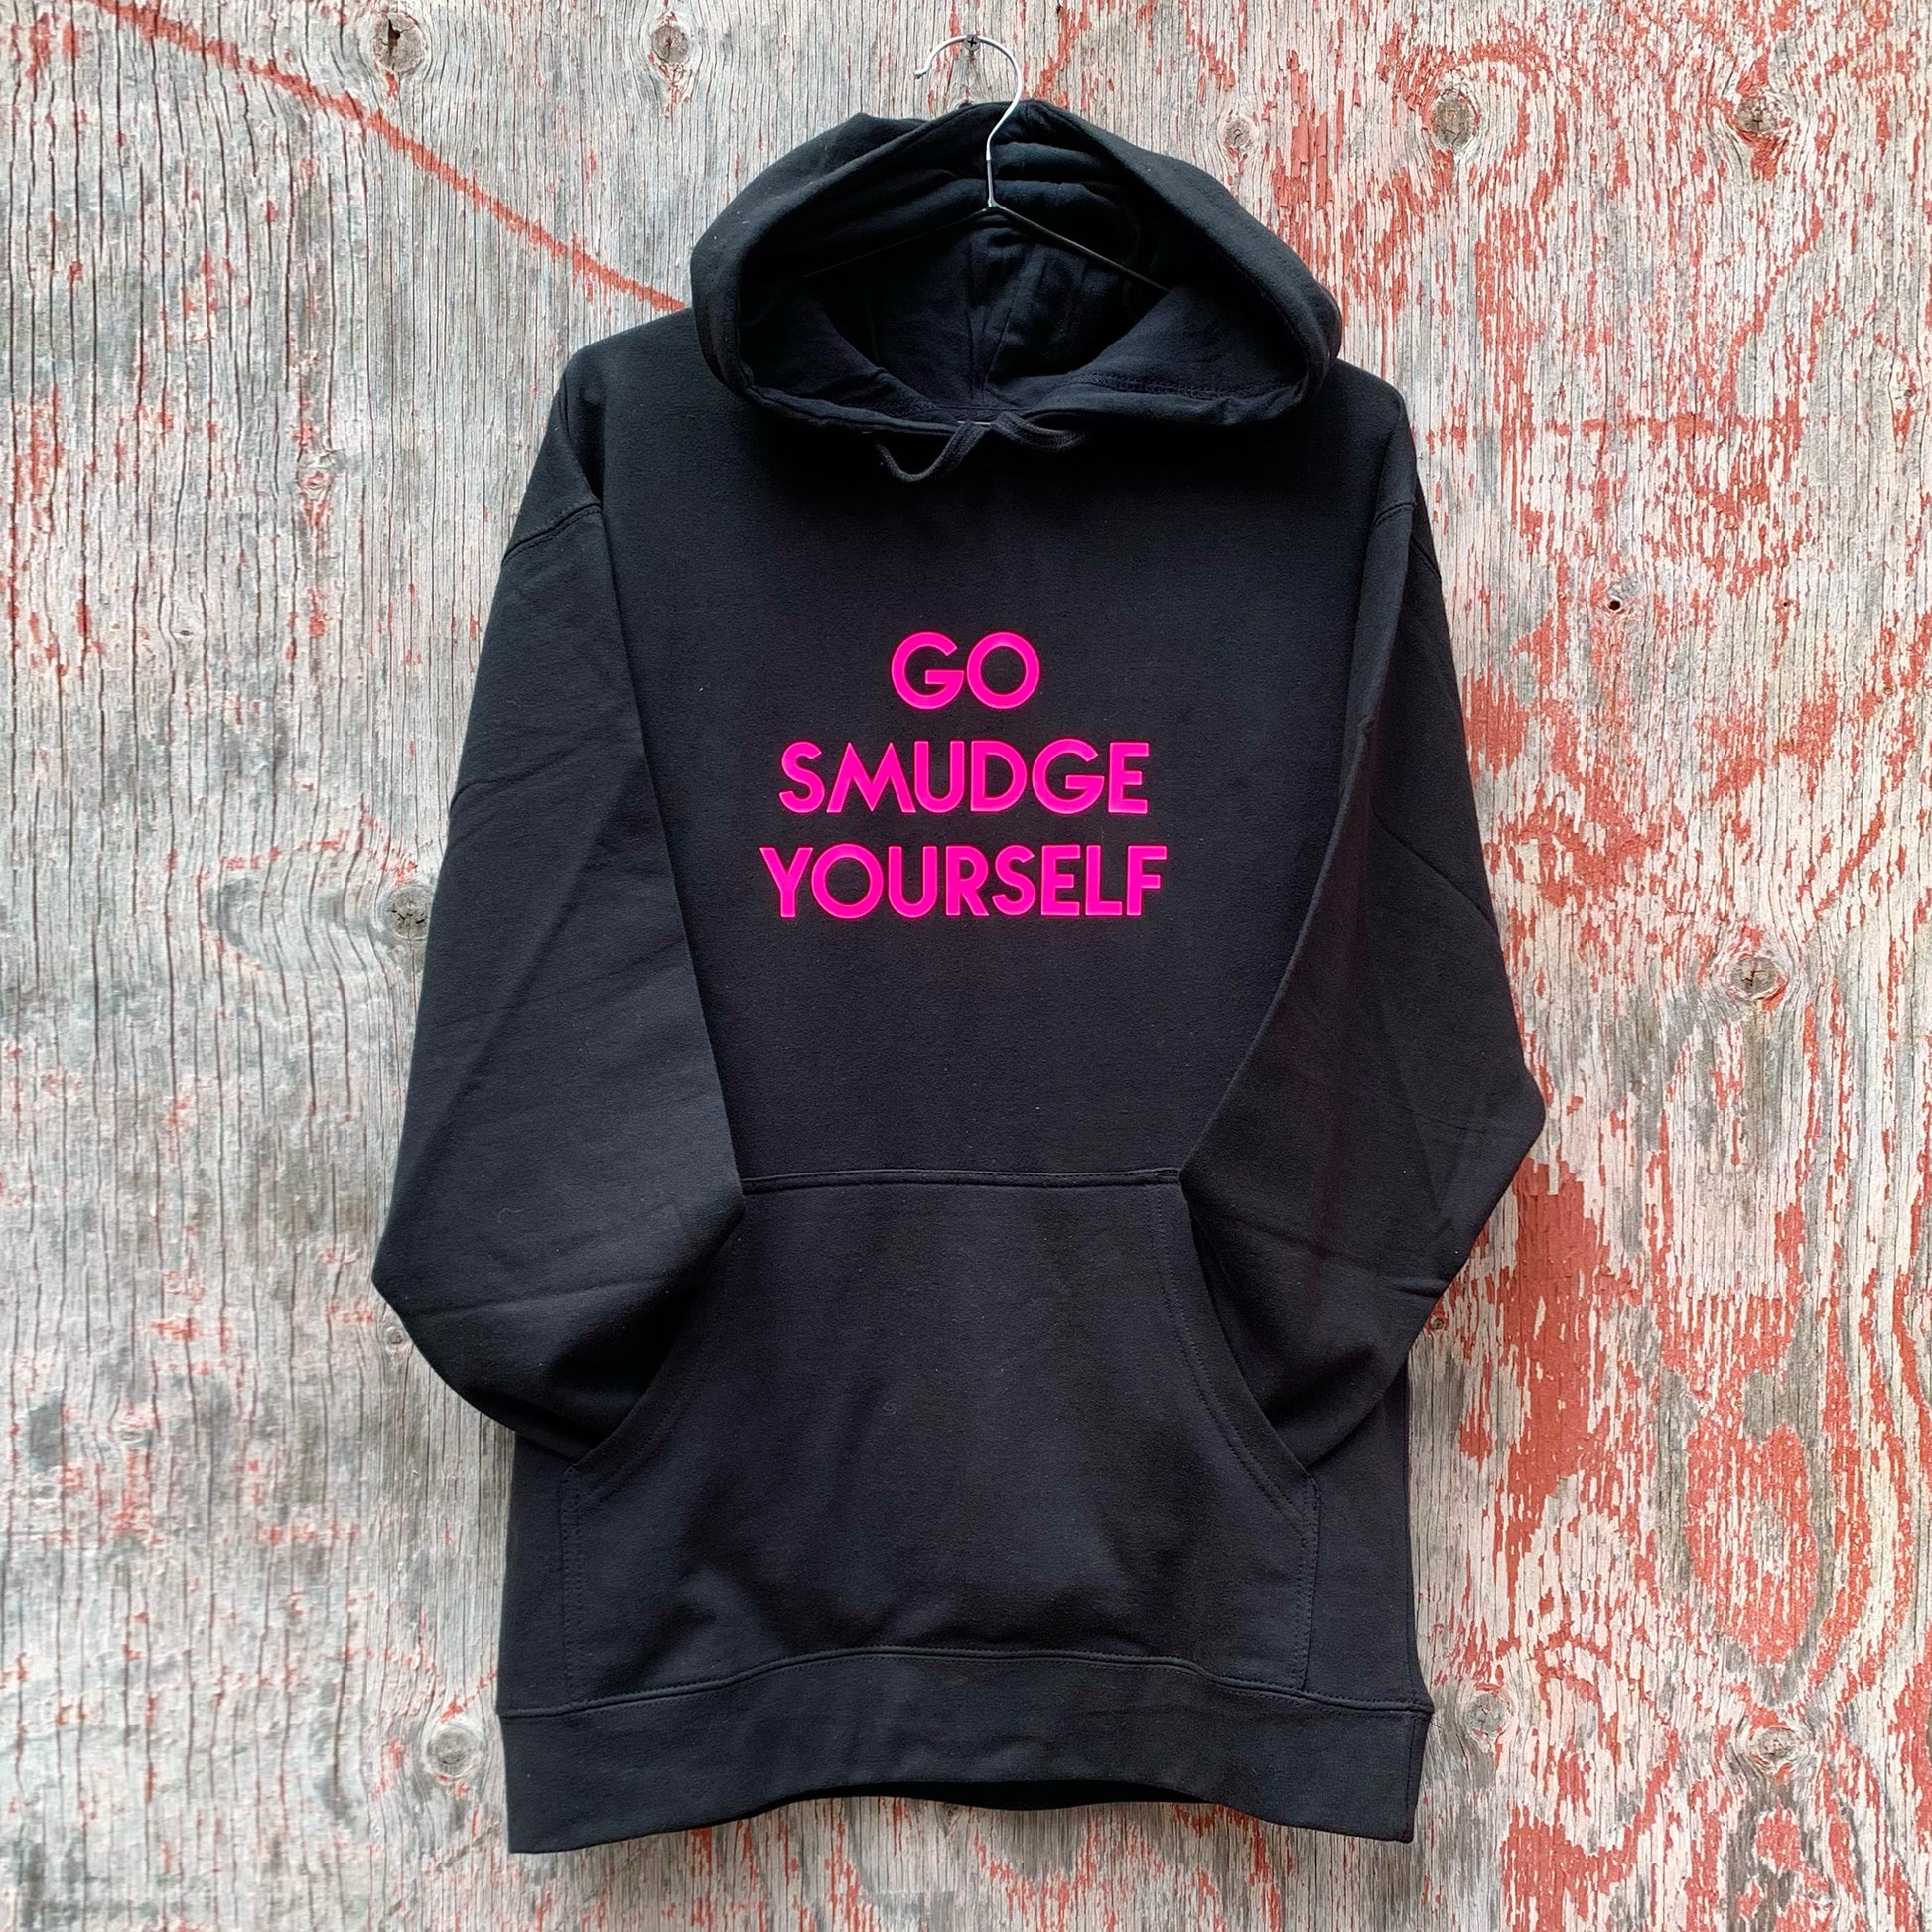 photo of custom black hooded sweatshirt with "Go Smudge Yourself" in neon pink geometric text, hanging on weathered wood